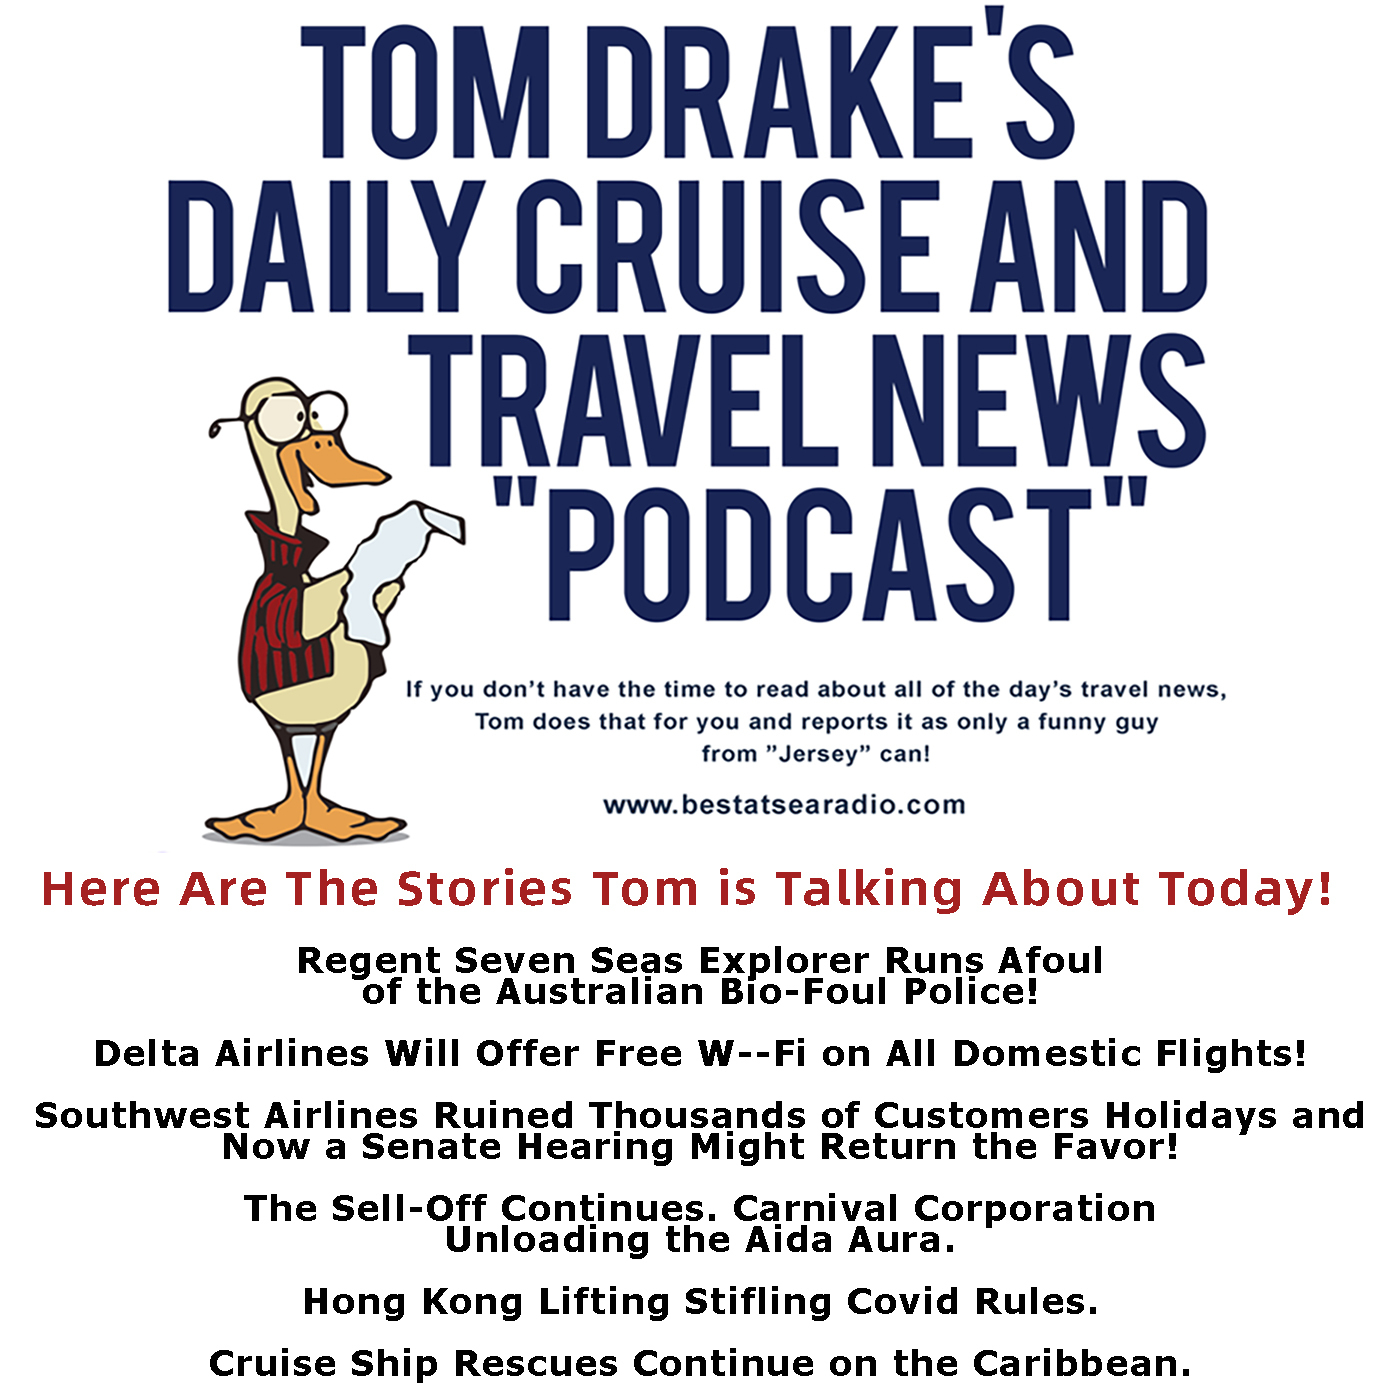 Tom Drake's Daily Cruise and Travel News "Podcast"